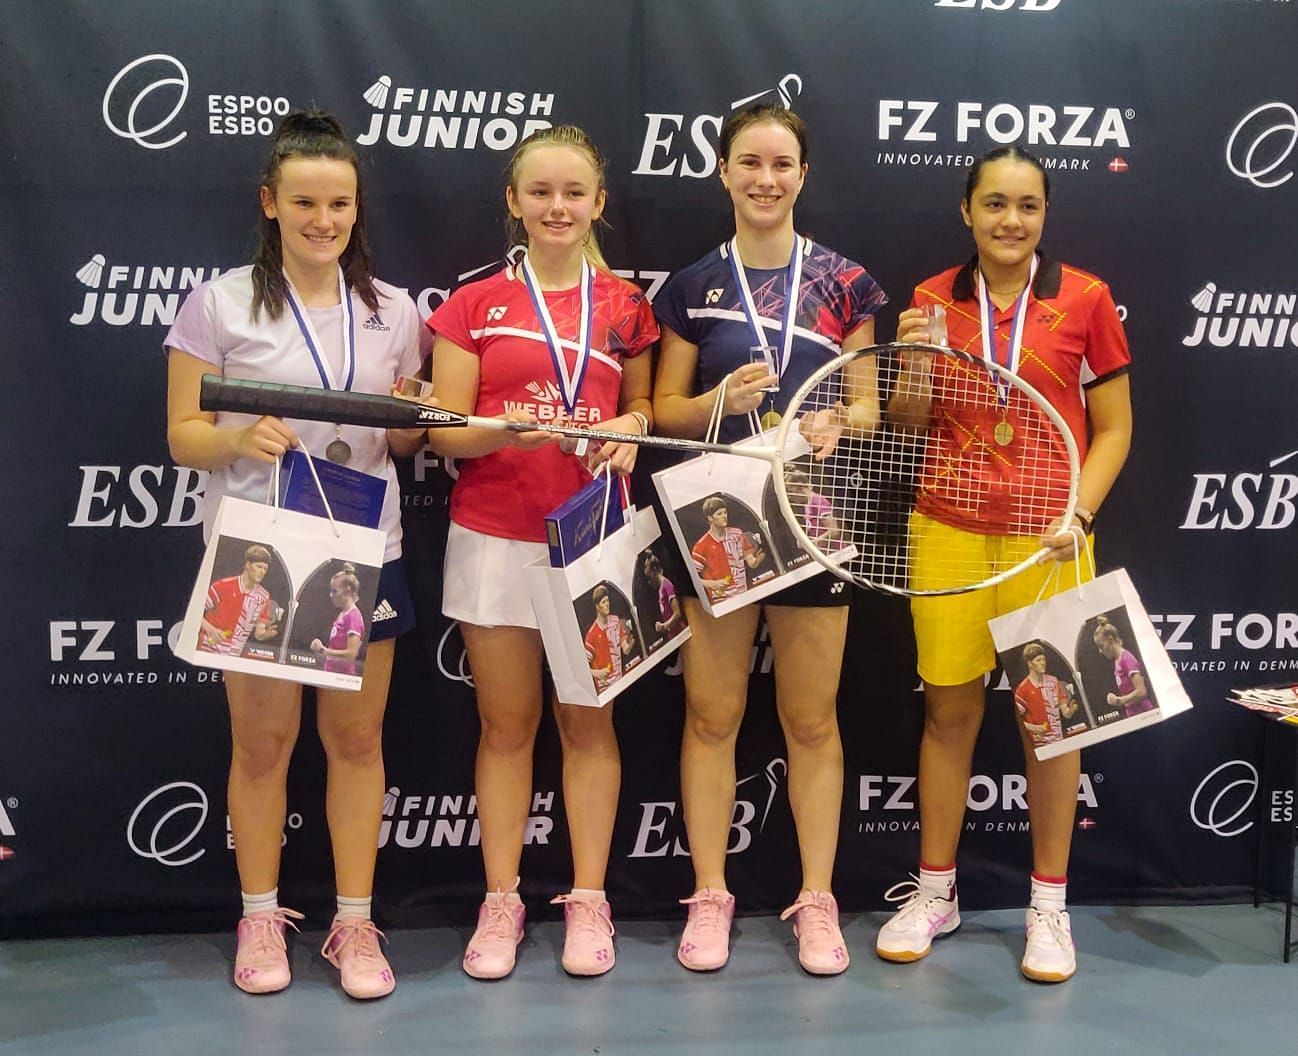 Taarini Suri (extreme right) partnered with Chloe Dennis of England in the Under-17 girls doubles